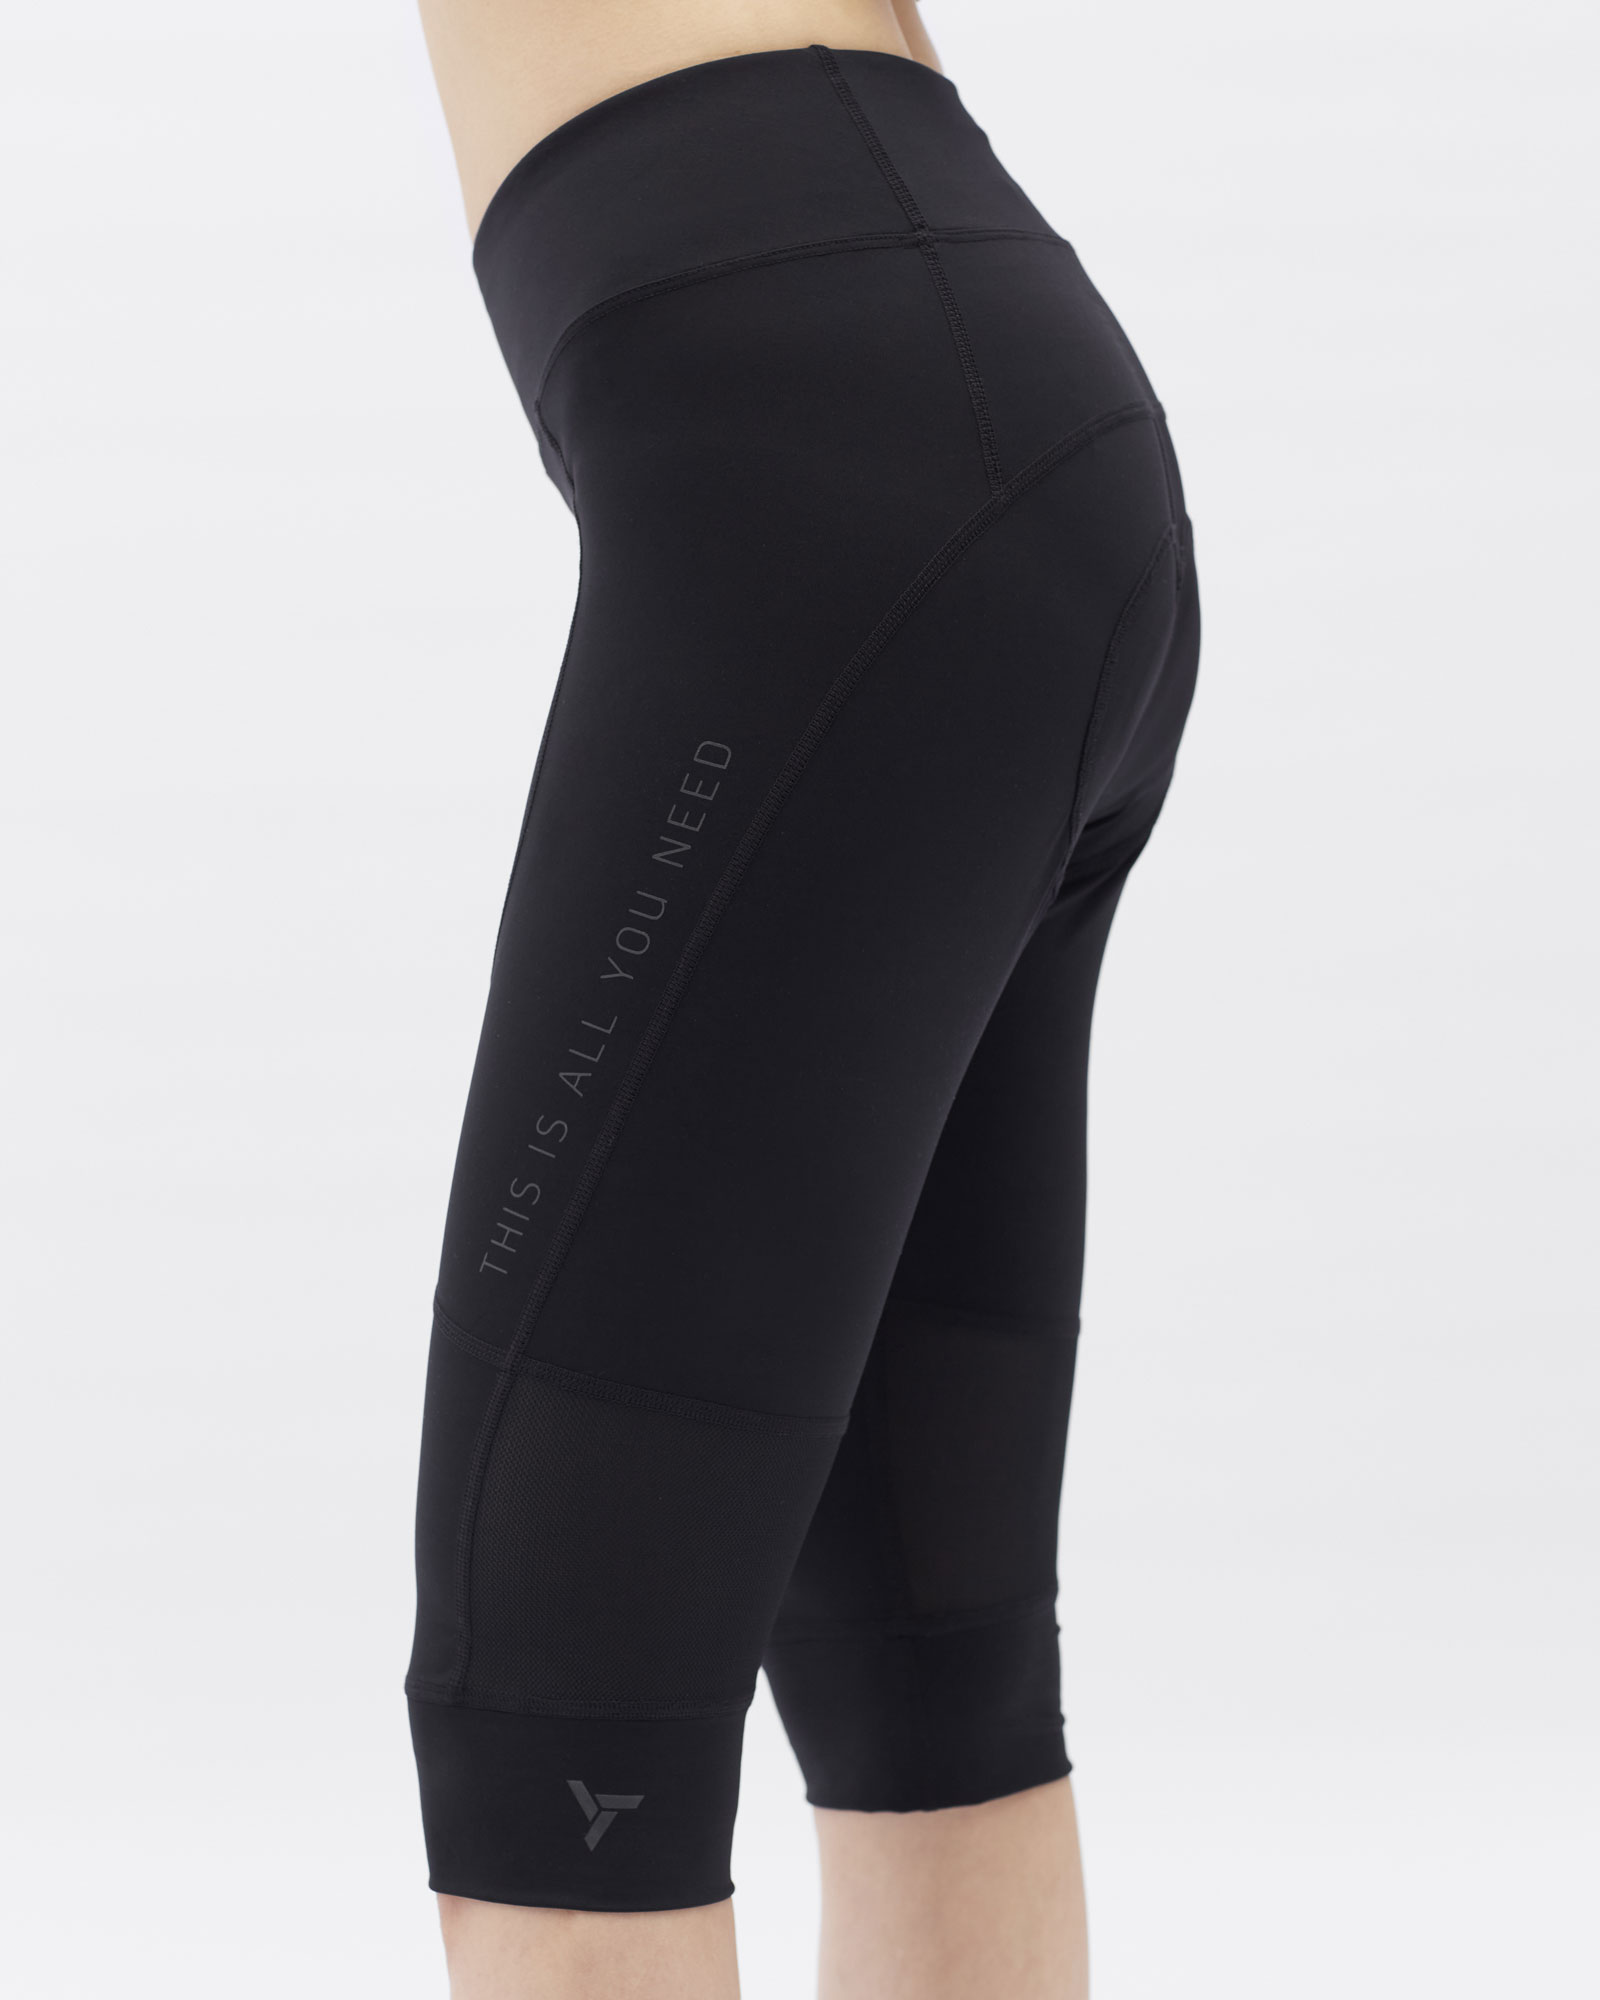 Women’s 3/4 cycling trousers with a liner